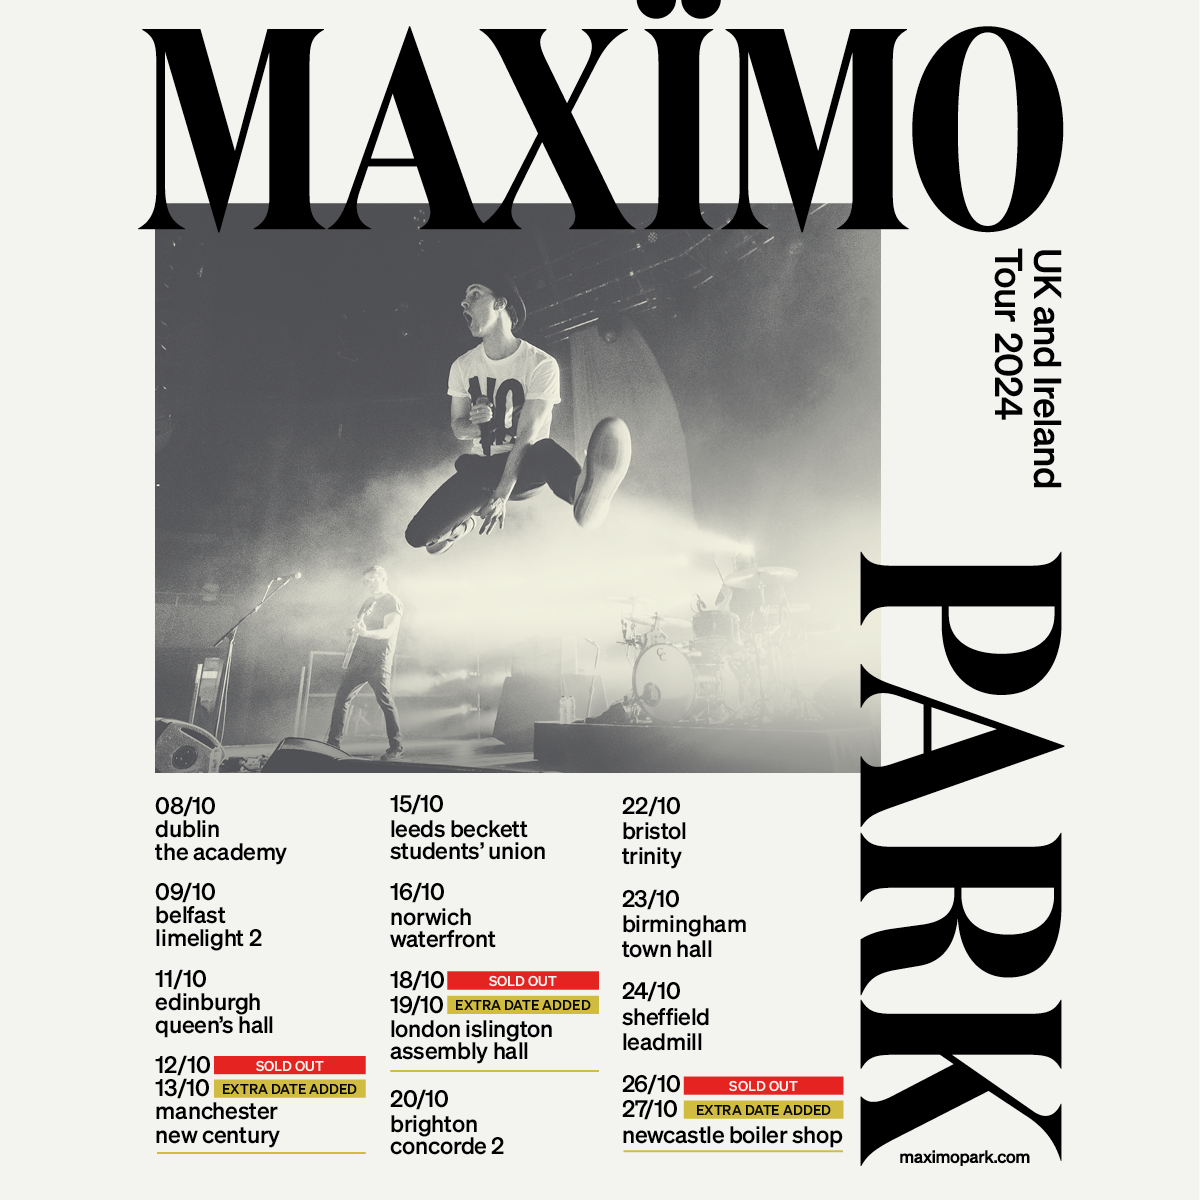 LOW TICKET WARNING @maximopark - Sat 19 Oct Don't miss Maximo Park this October. The first night is sold out and there are only a handful of tickets left for the second date. Grab your tickets before they're gone! orlo.uk/nZkuk